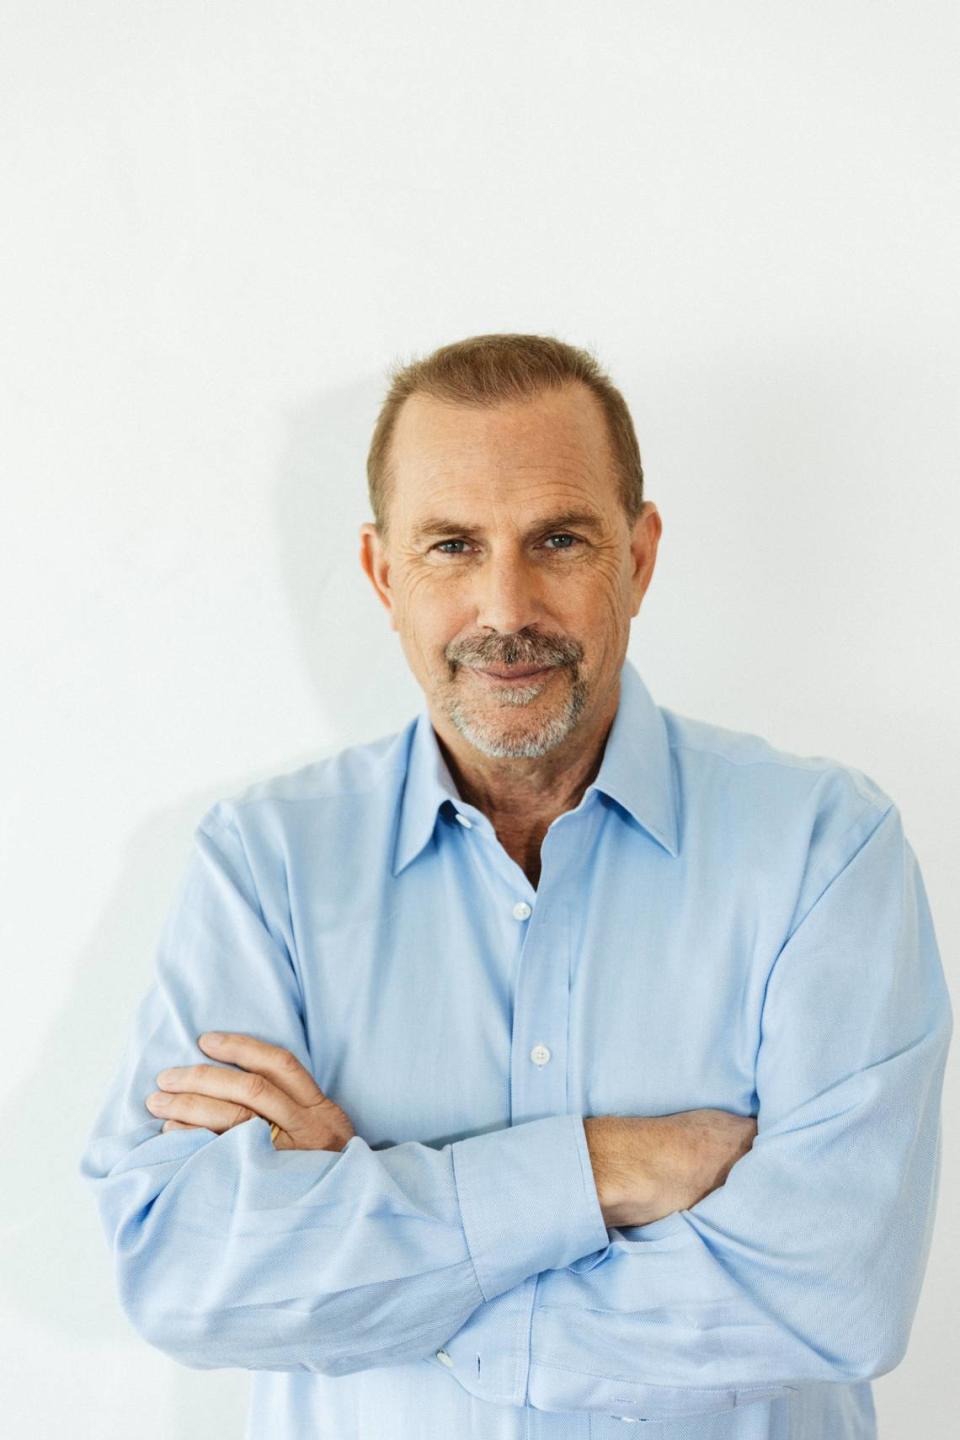 Kevin Costner poses for a portrait in Carpinteria, Calif., May 11, 2018. In the modern-day Western “Yellowstone,” Costner plays John Dutton, patriarch of the largest contiguous cattle ranch in the United States, which abuts a national park, an Indian reservation and a town overflowing with land developers and energy speculators. (Elizabeth Weinberg/The New York Times)